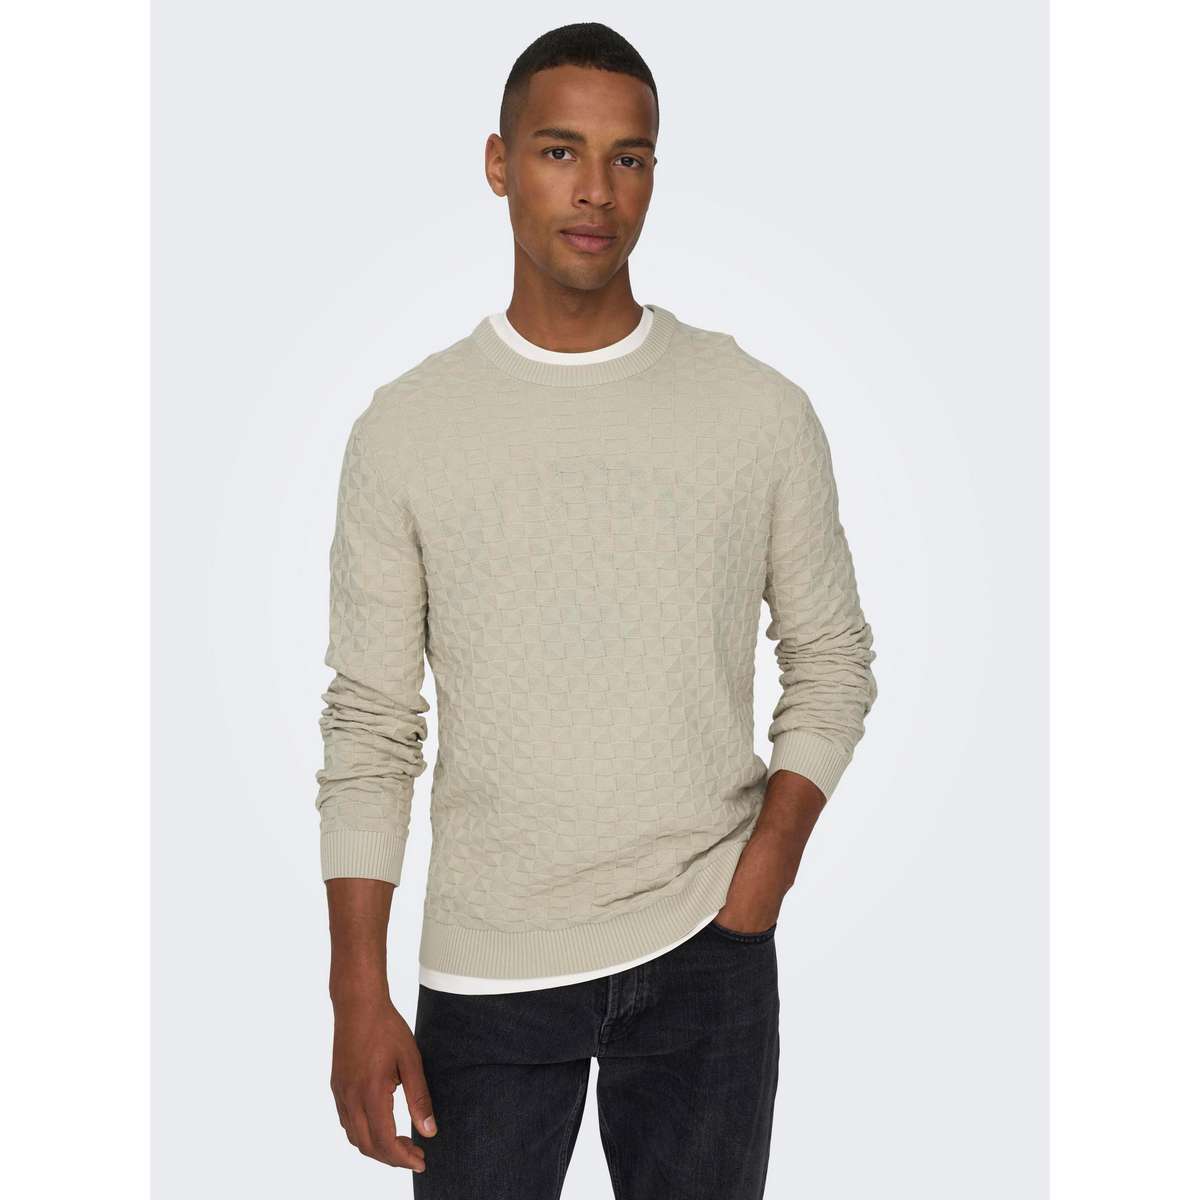 ONLY & SONS MEN’S REGULAR FIT COTTON CREW NECK PULLOVER 22026559 GREY / SILVER LINING